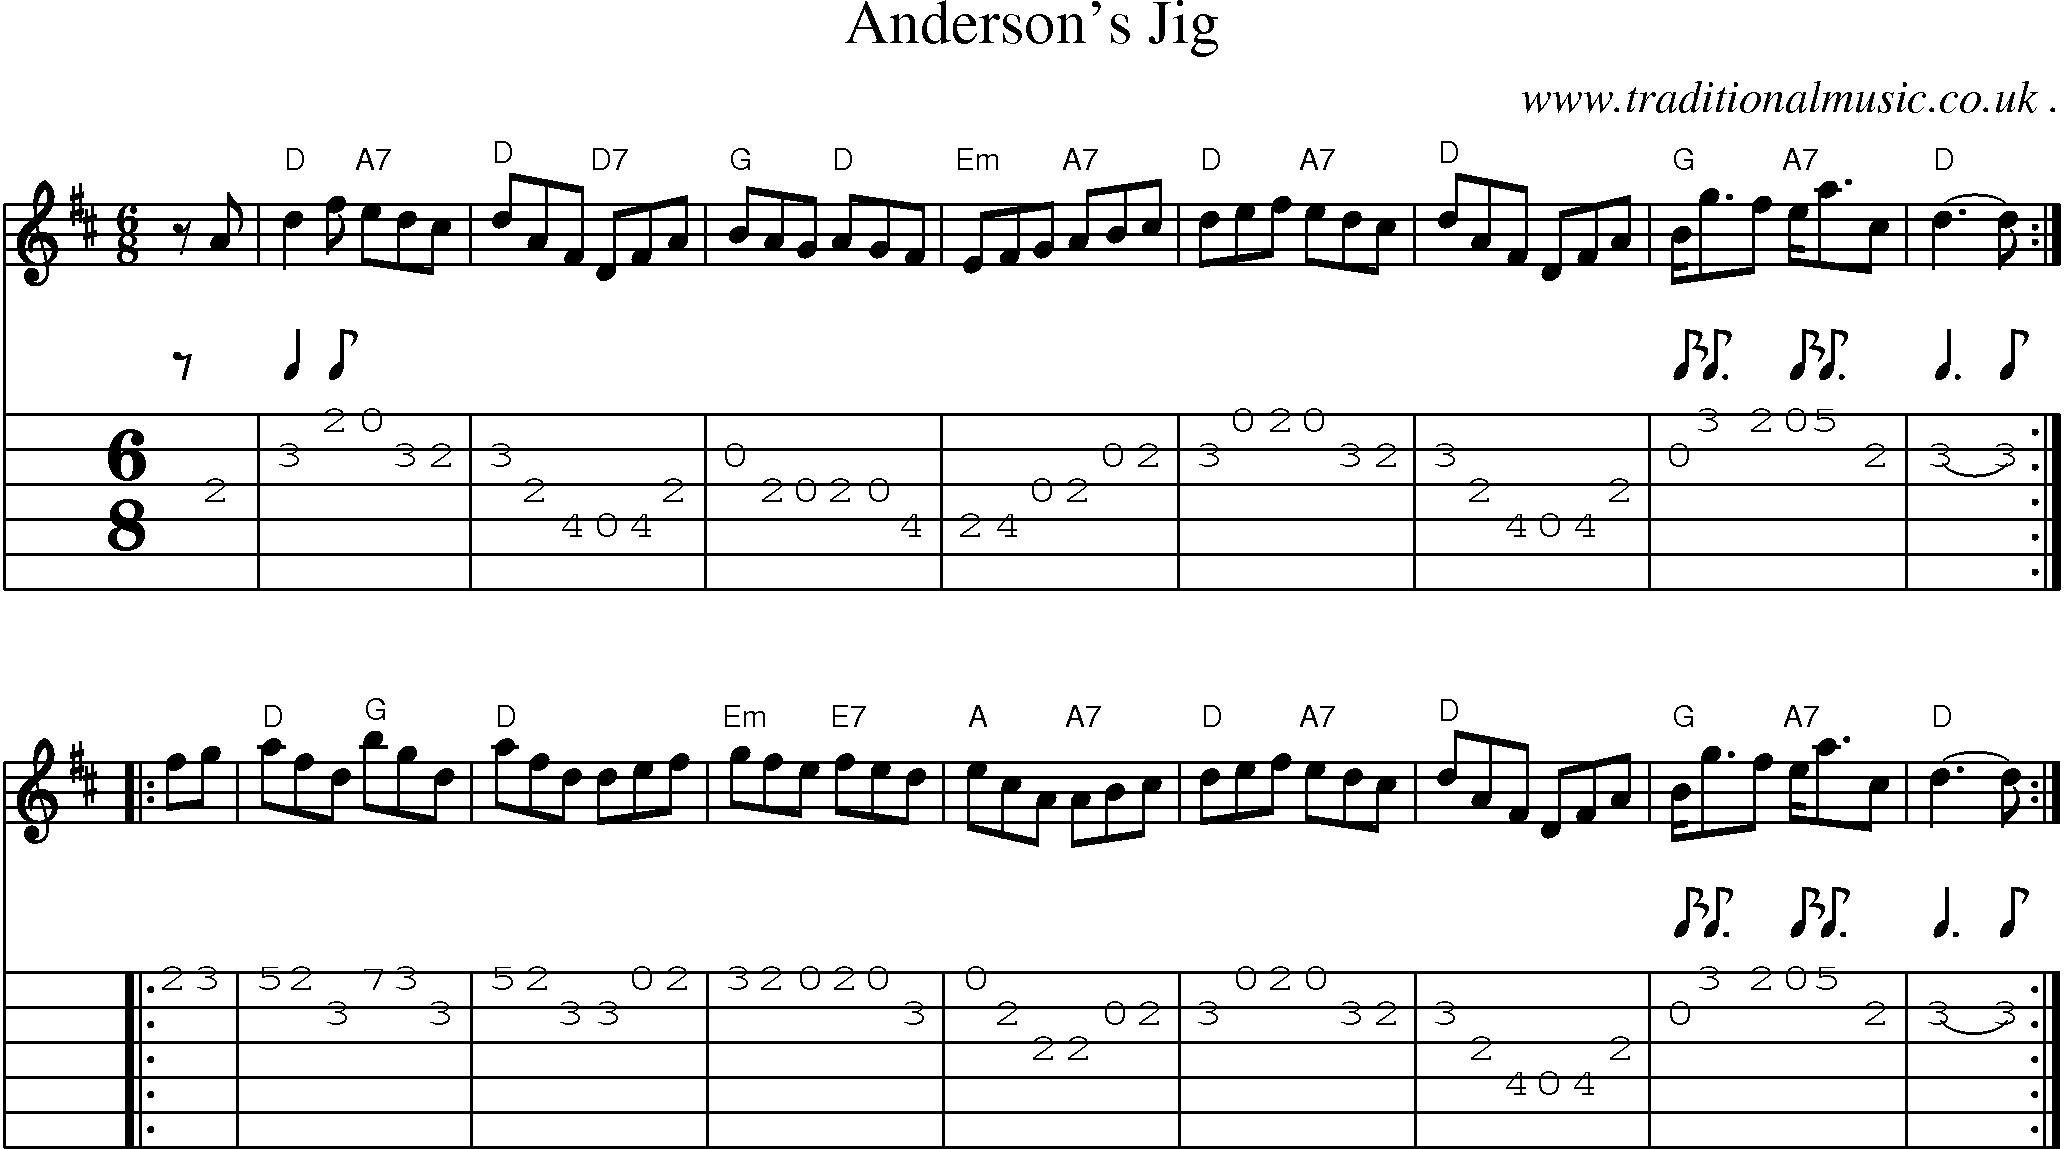 Sheet-music  score, Chords and Guitar Tabs for Andersons Jig